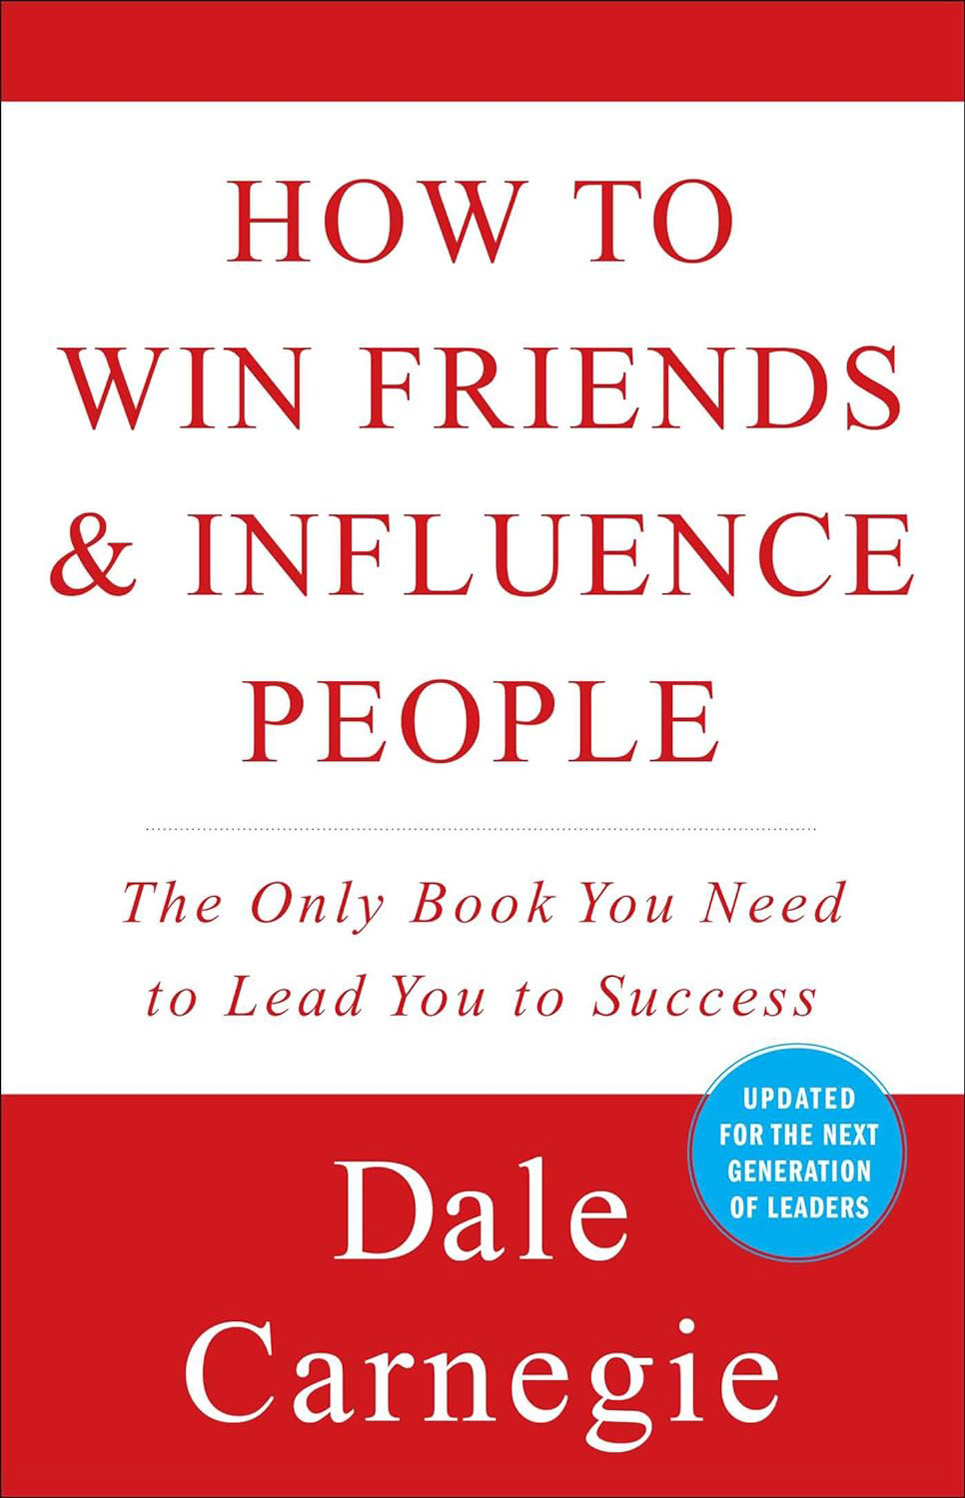 How to Win Friends & Influence People (Dale Carnegie Books